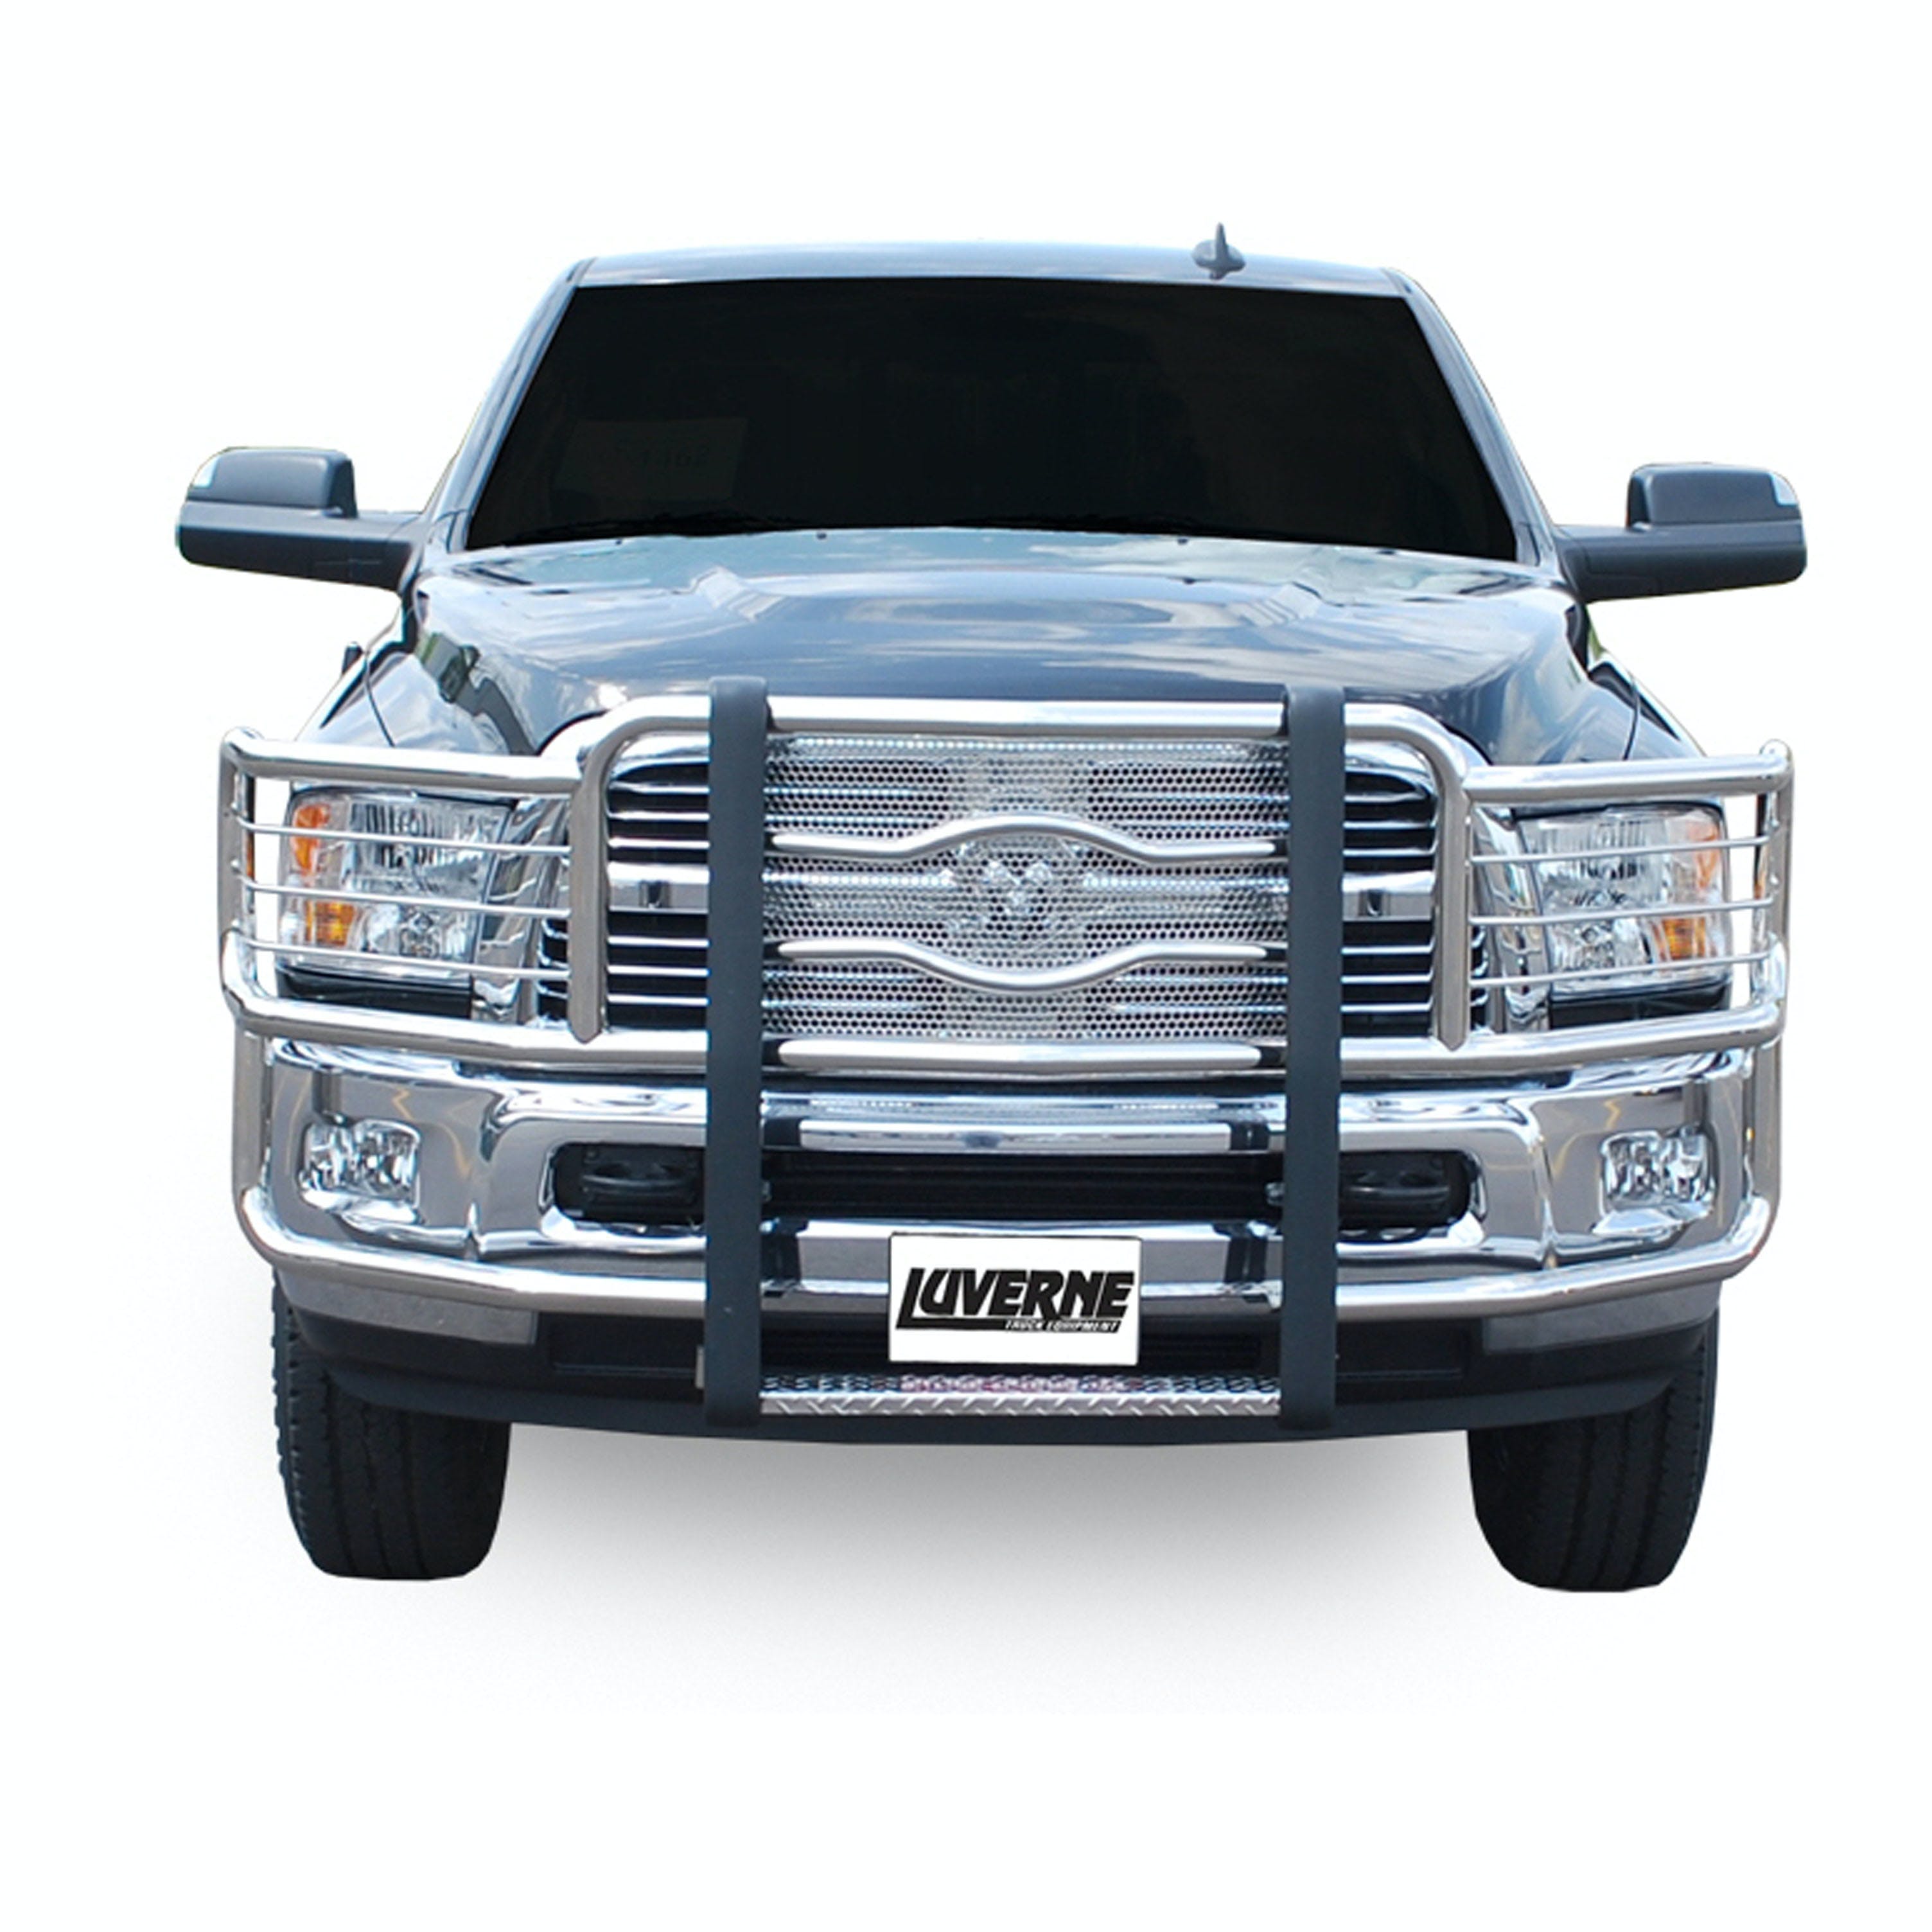 LUVERNE 311033 Prowler Max Grille Guard